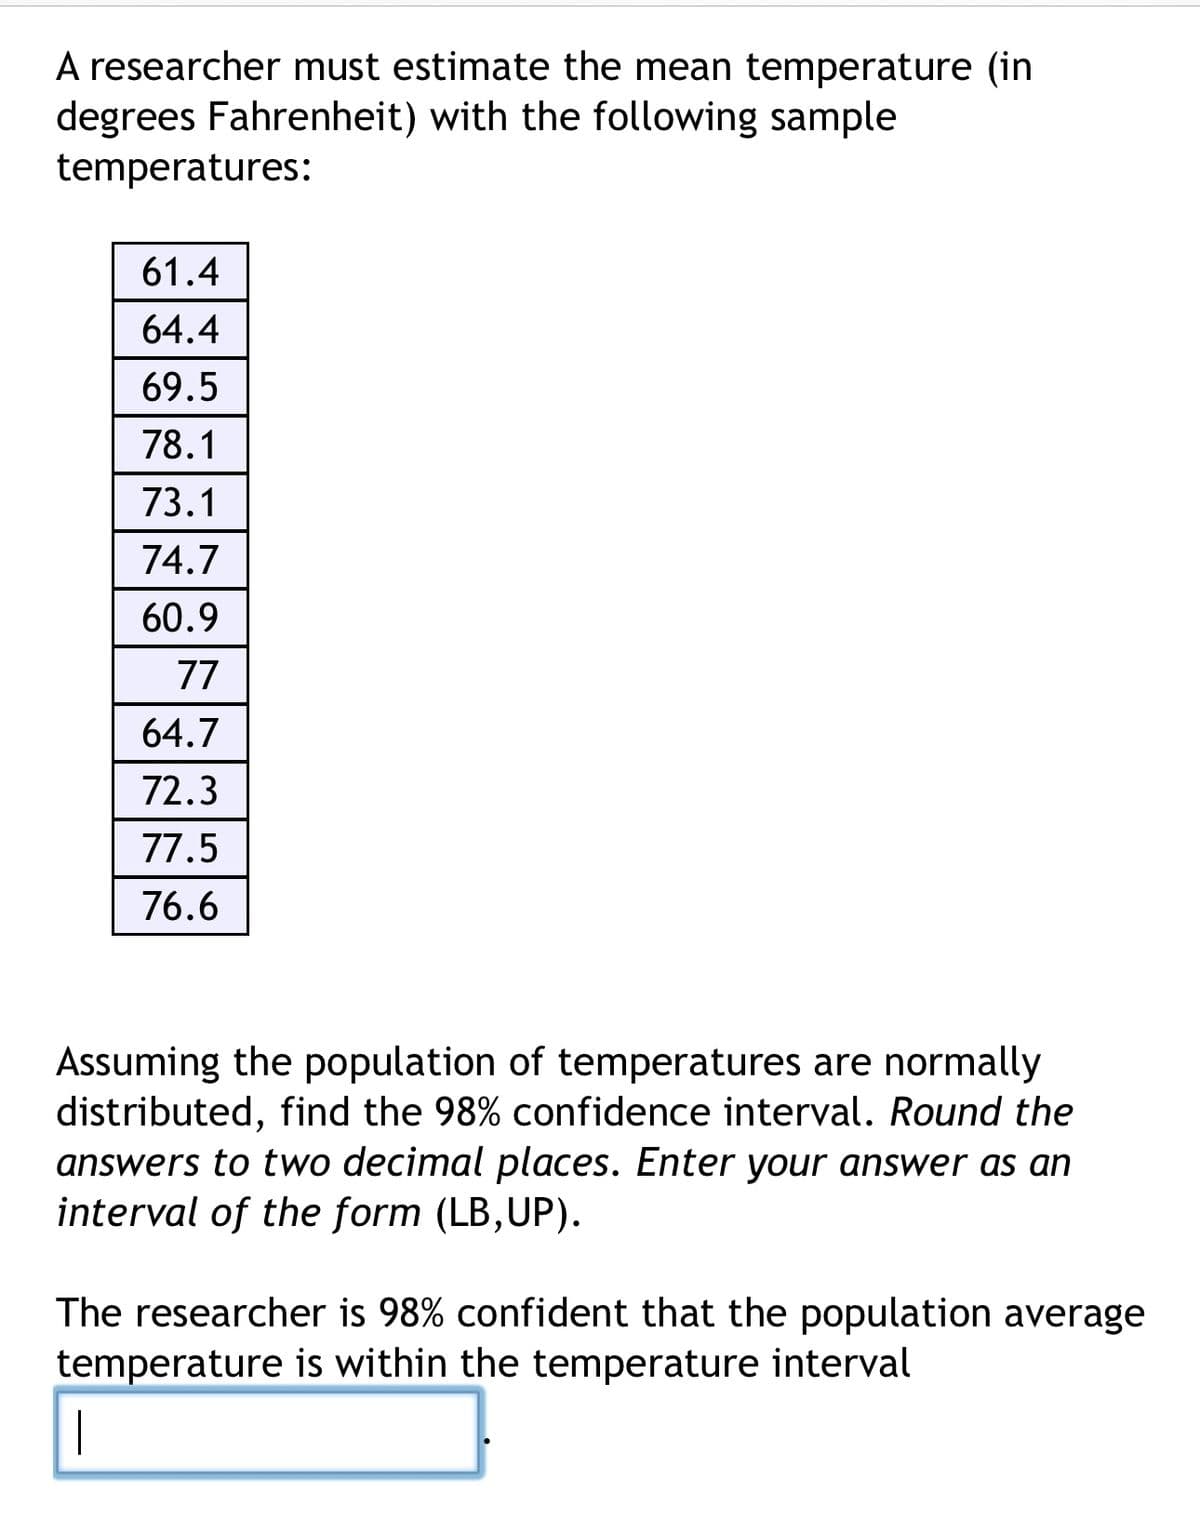 A researcher must estimate the mean temperature (in
degrees Fahrenheit) with the following sample
temperatures:
61.4
64.4
69.5
78.1
73.1
74.7
60.9
77
64.7
72.3
77.5
76.6
Assuming the population of temperatures are normally
distributed, find the 98% confidence interval. Round the
answers to two decimal places. Enter your answer as an
interval of the form (LB, UP).
The researcher is 98% confident that the population average
temperature is within the temperature interval
|